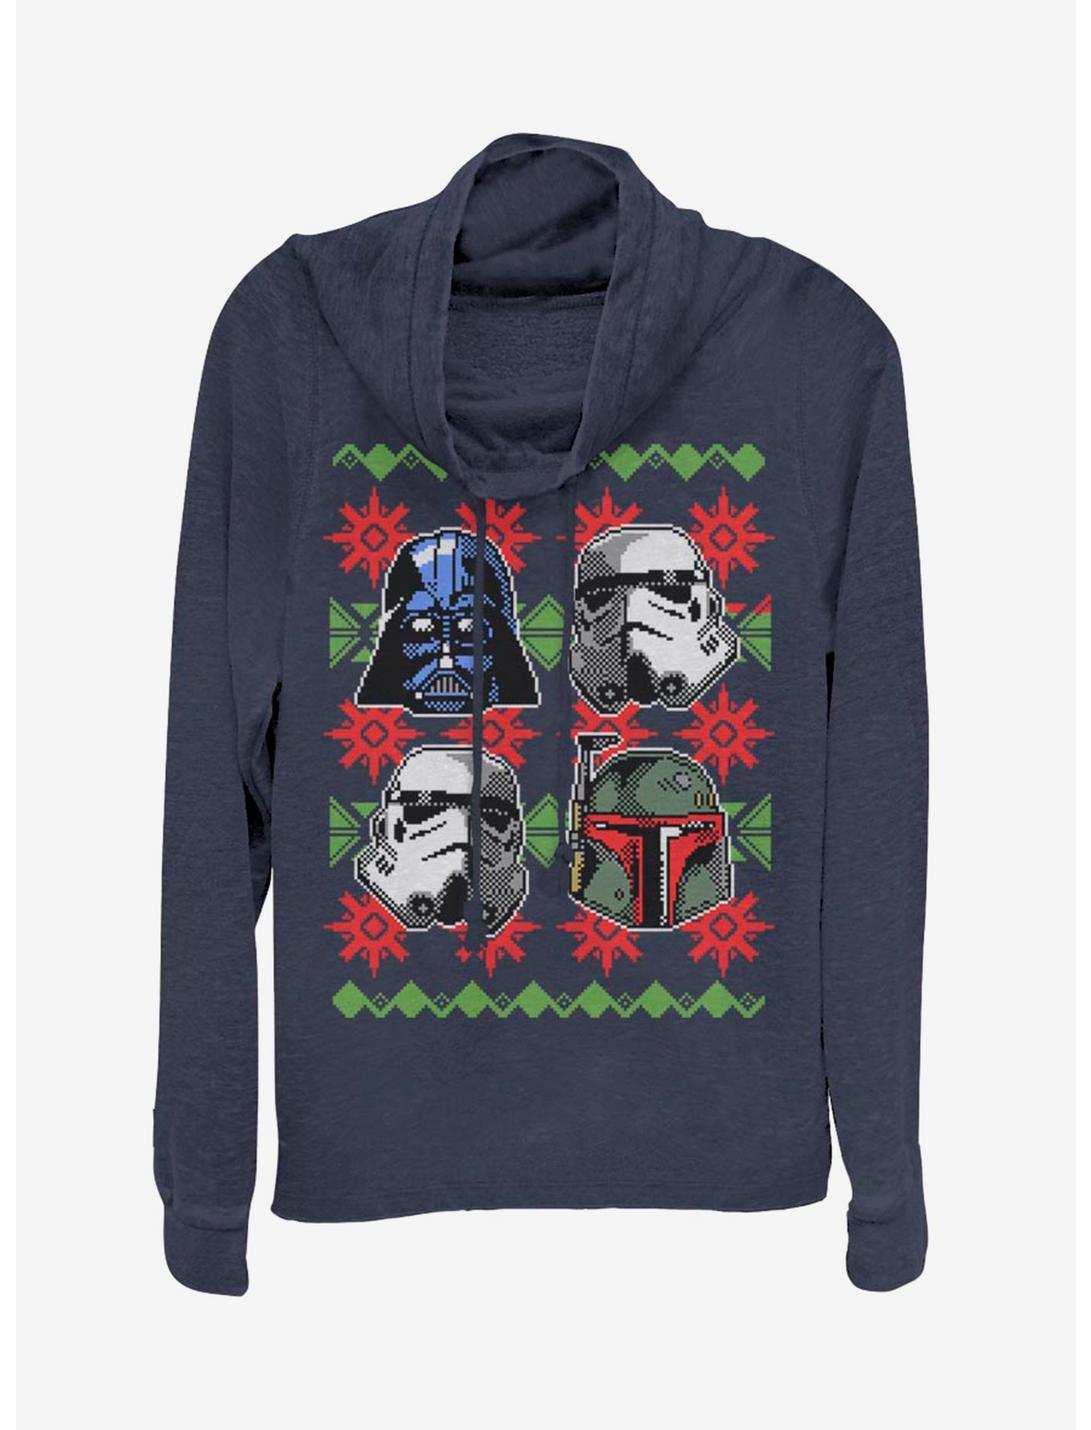 Star Wars Holiday Faces Cowlneck Long-Sleeve Womens Top, NAVY, hi-res